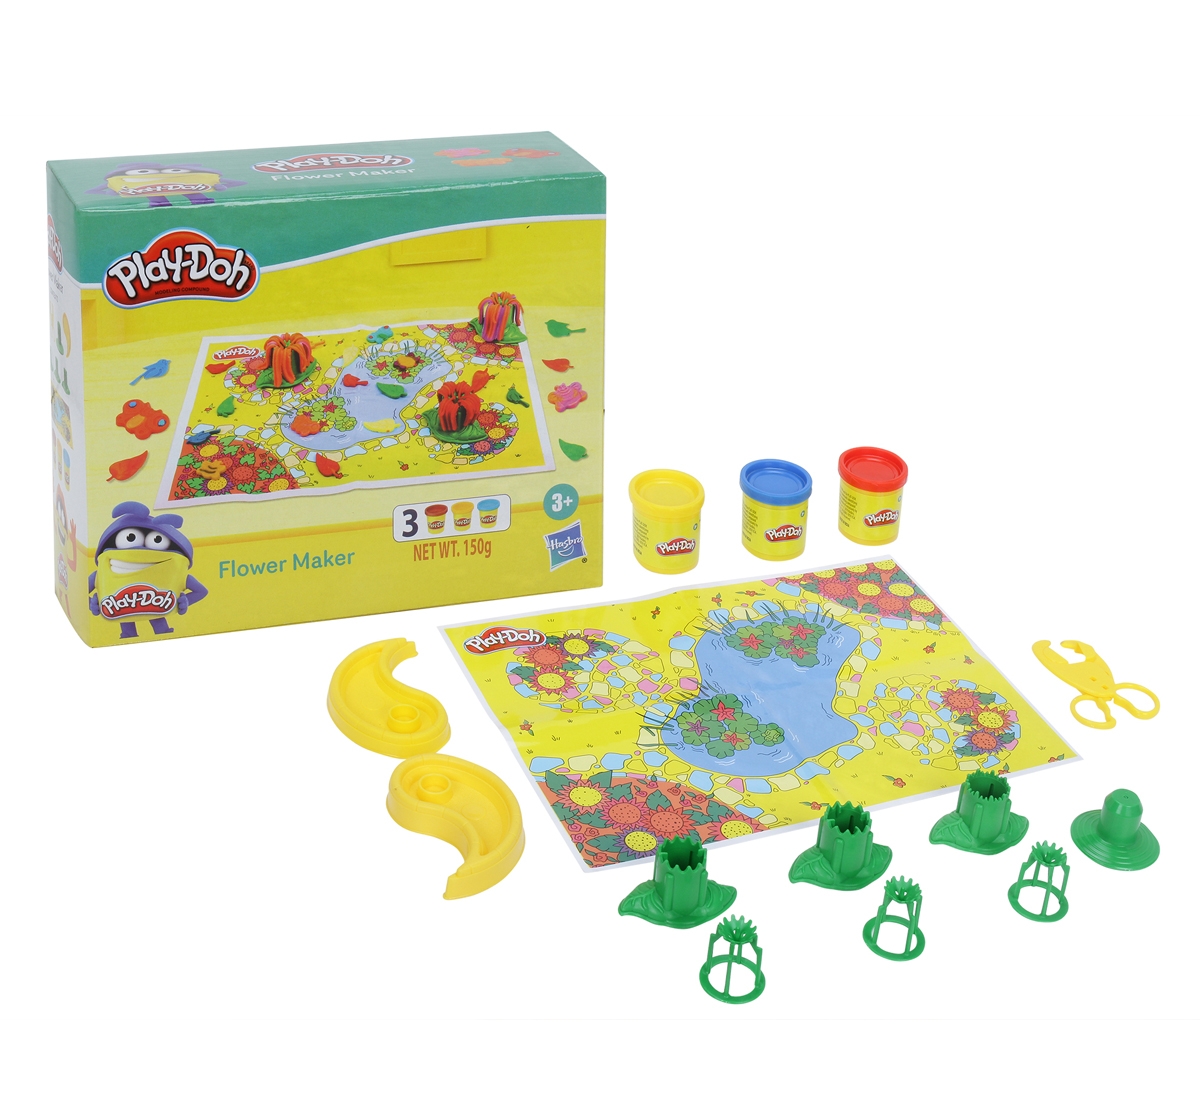 Play-Doh | Play Doh Flower Maker Toy for Kids 3Y+, Multicolour